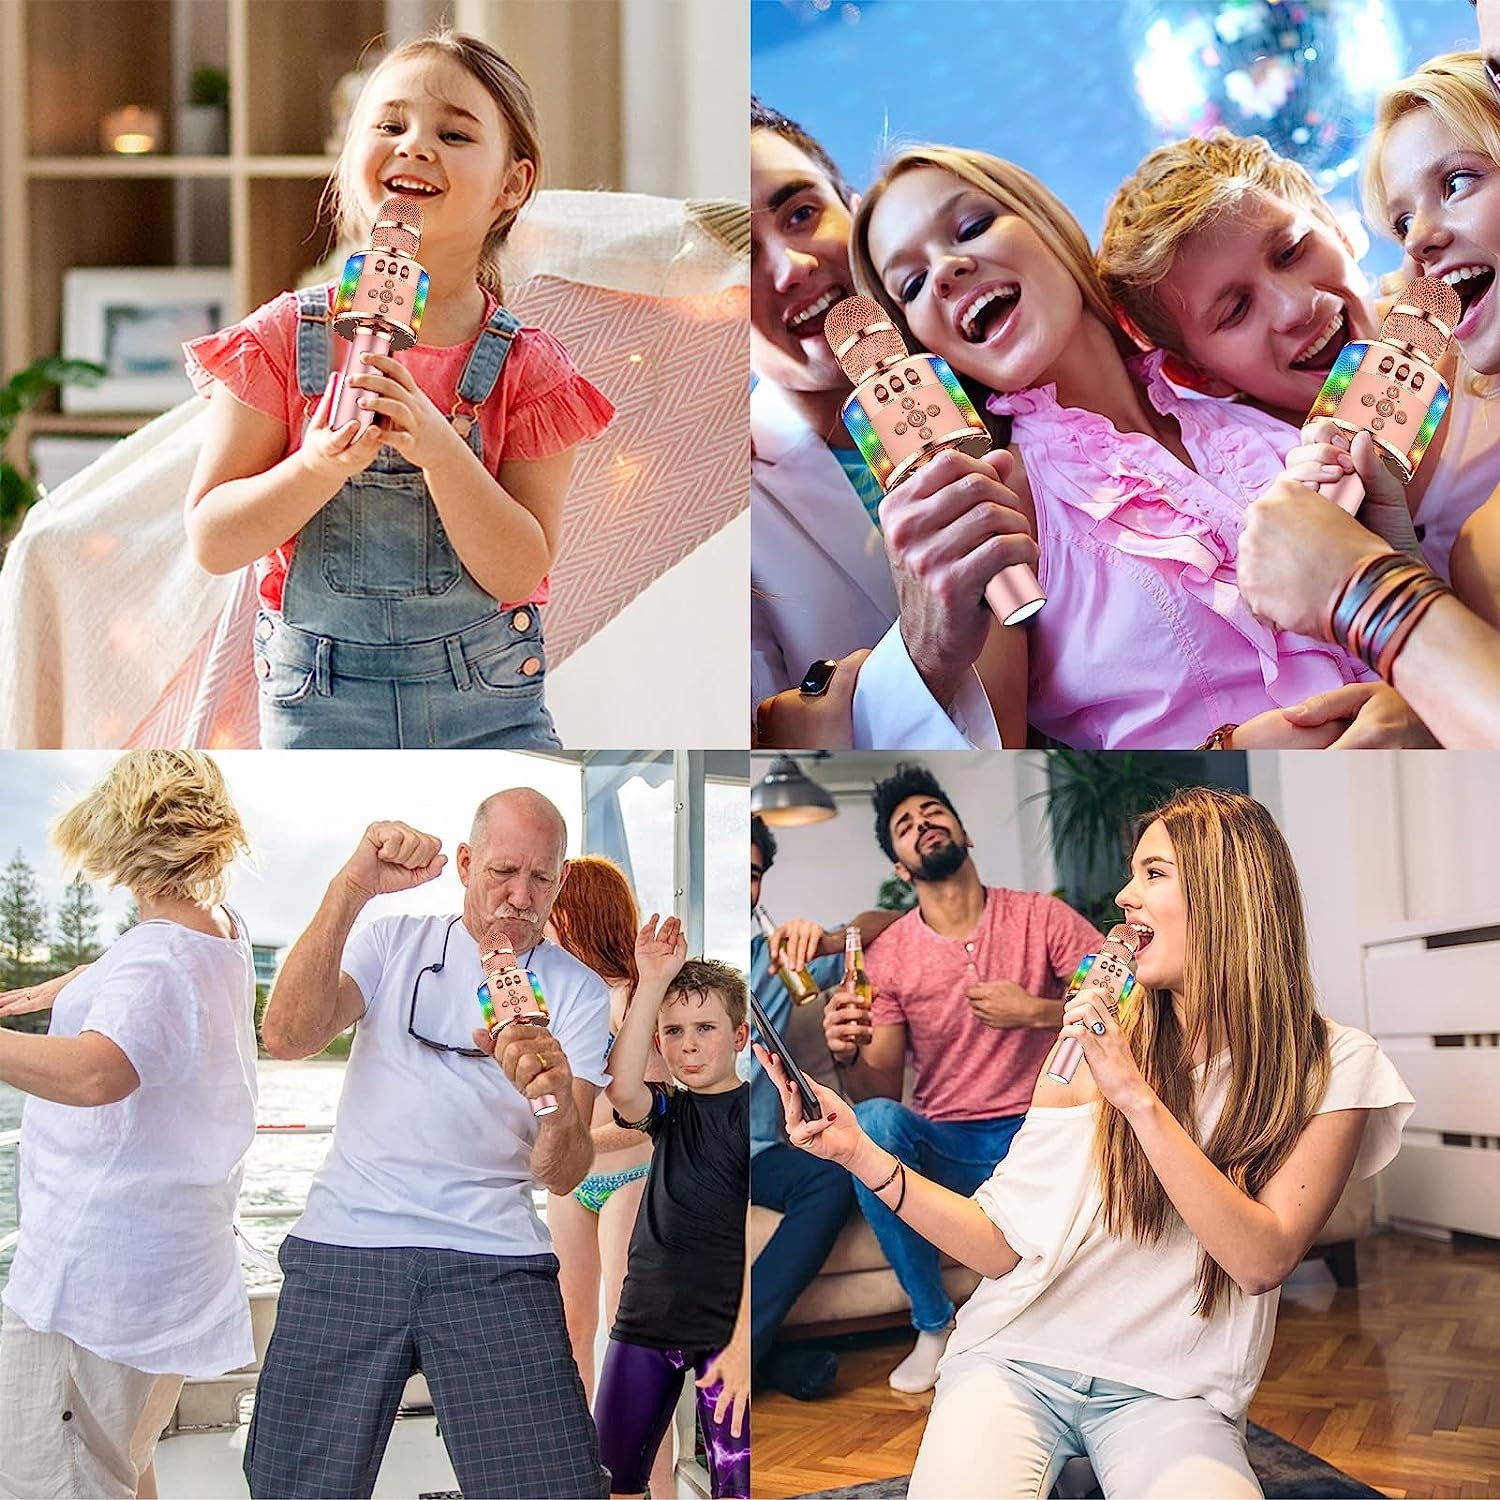 Quad image of kids and adults rocking out with light up karaoke microphone